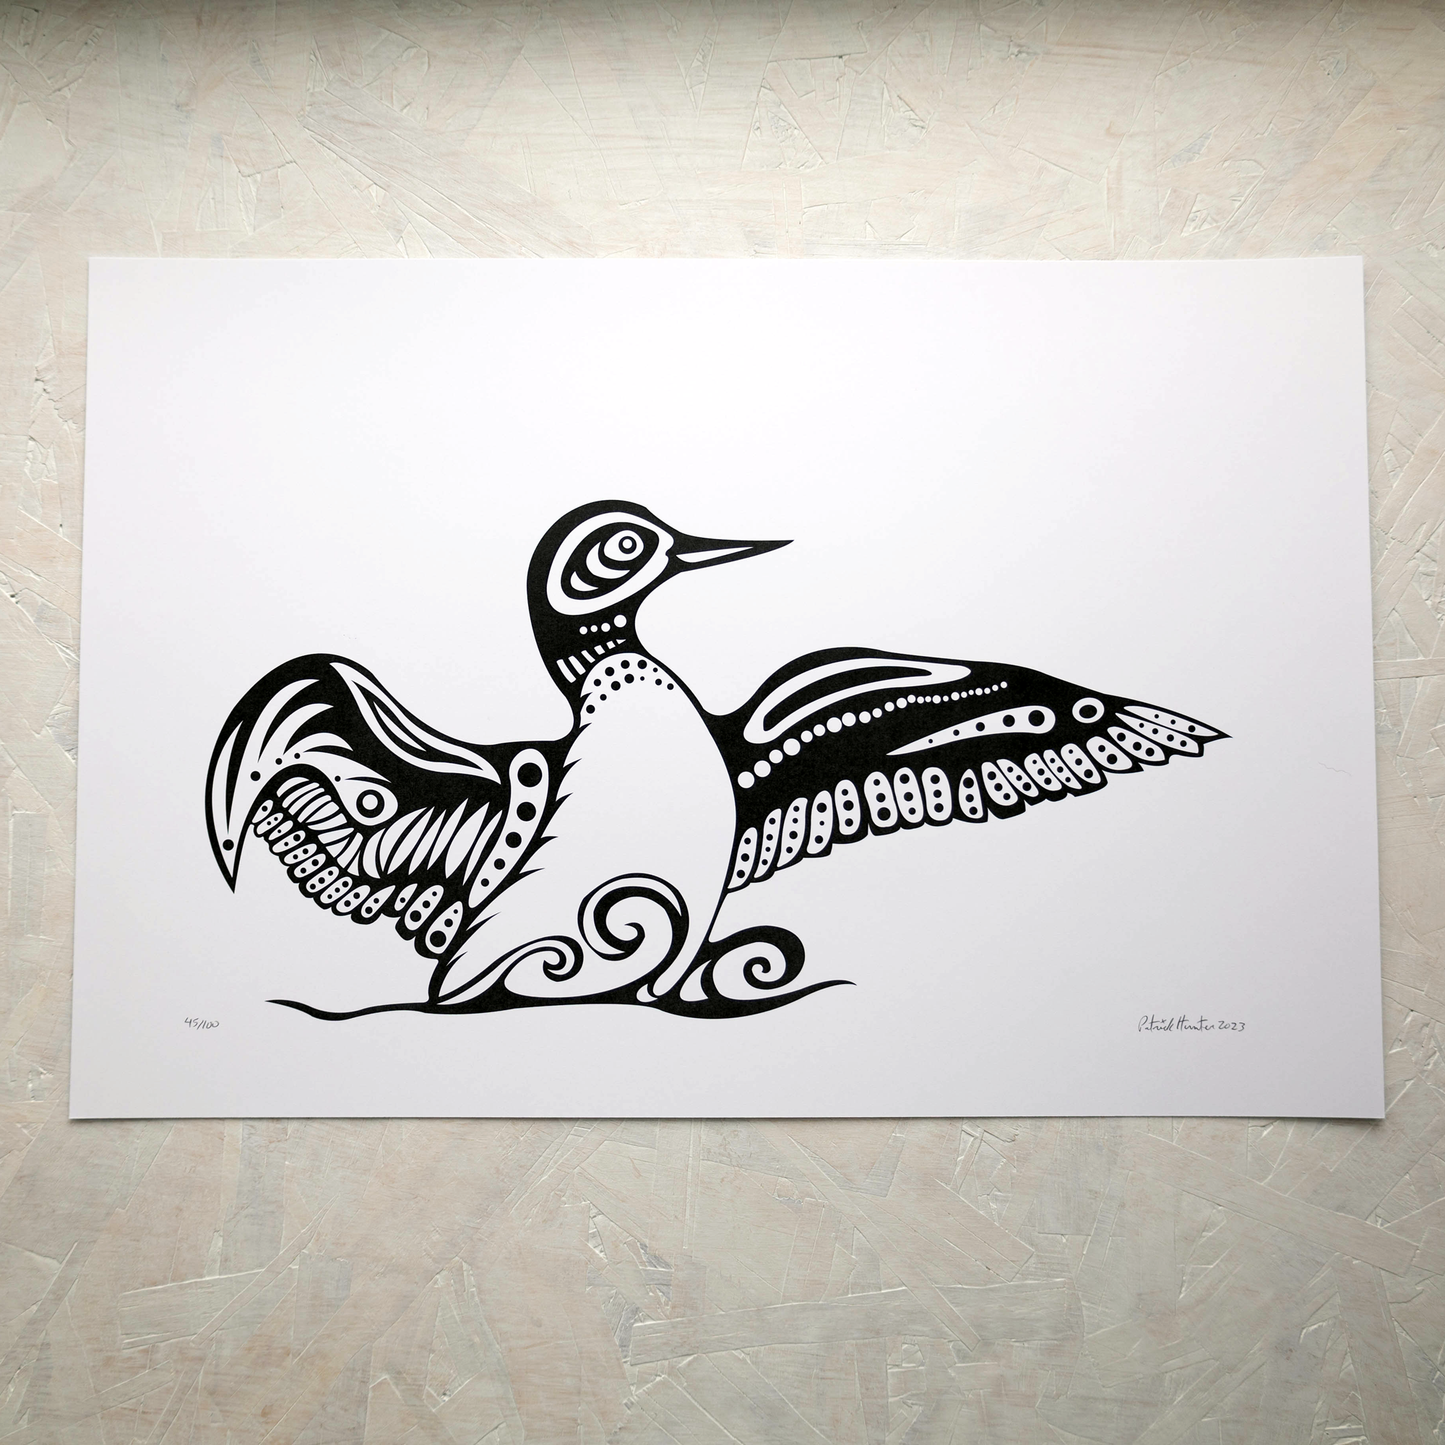 Print of Patrick Hunter's painting of a loon, wings outstretched, black and white, woodland art style.